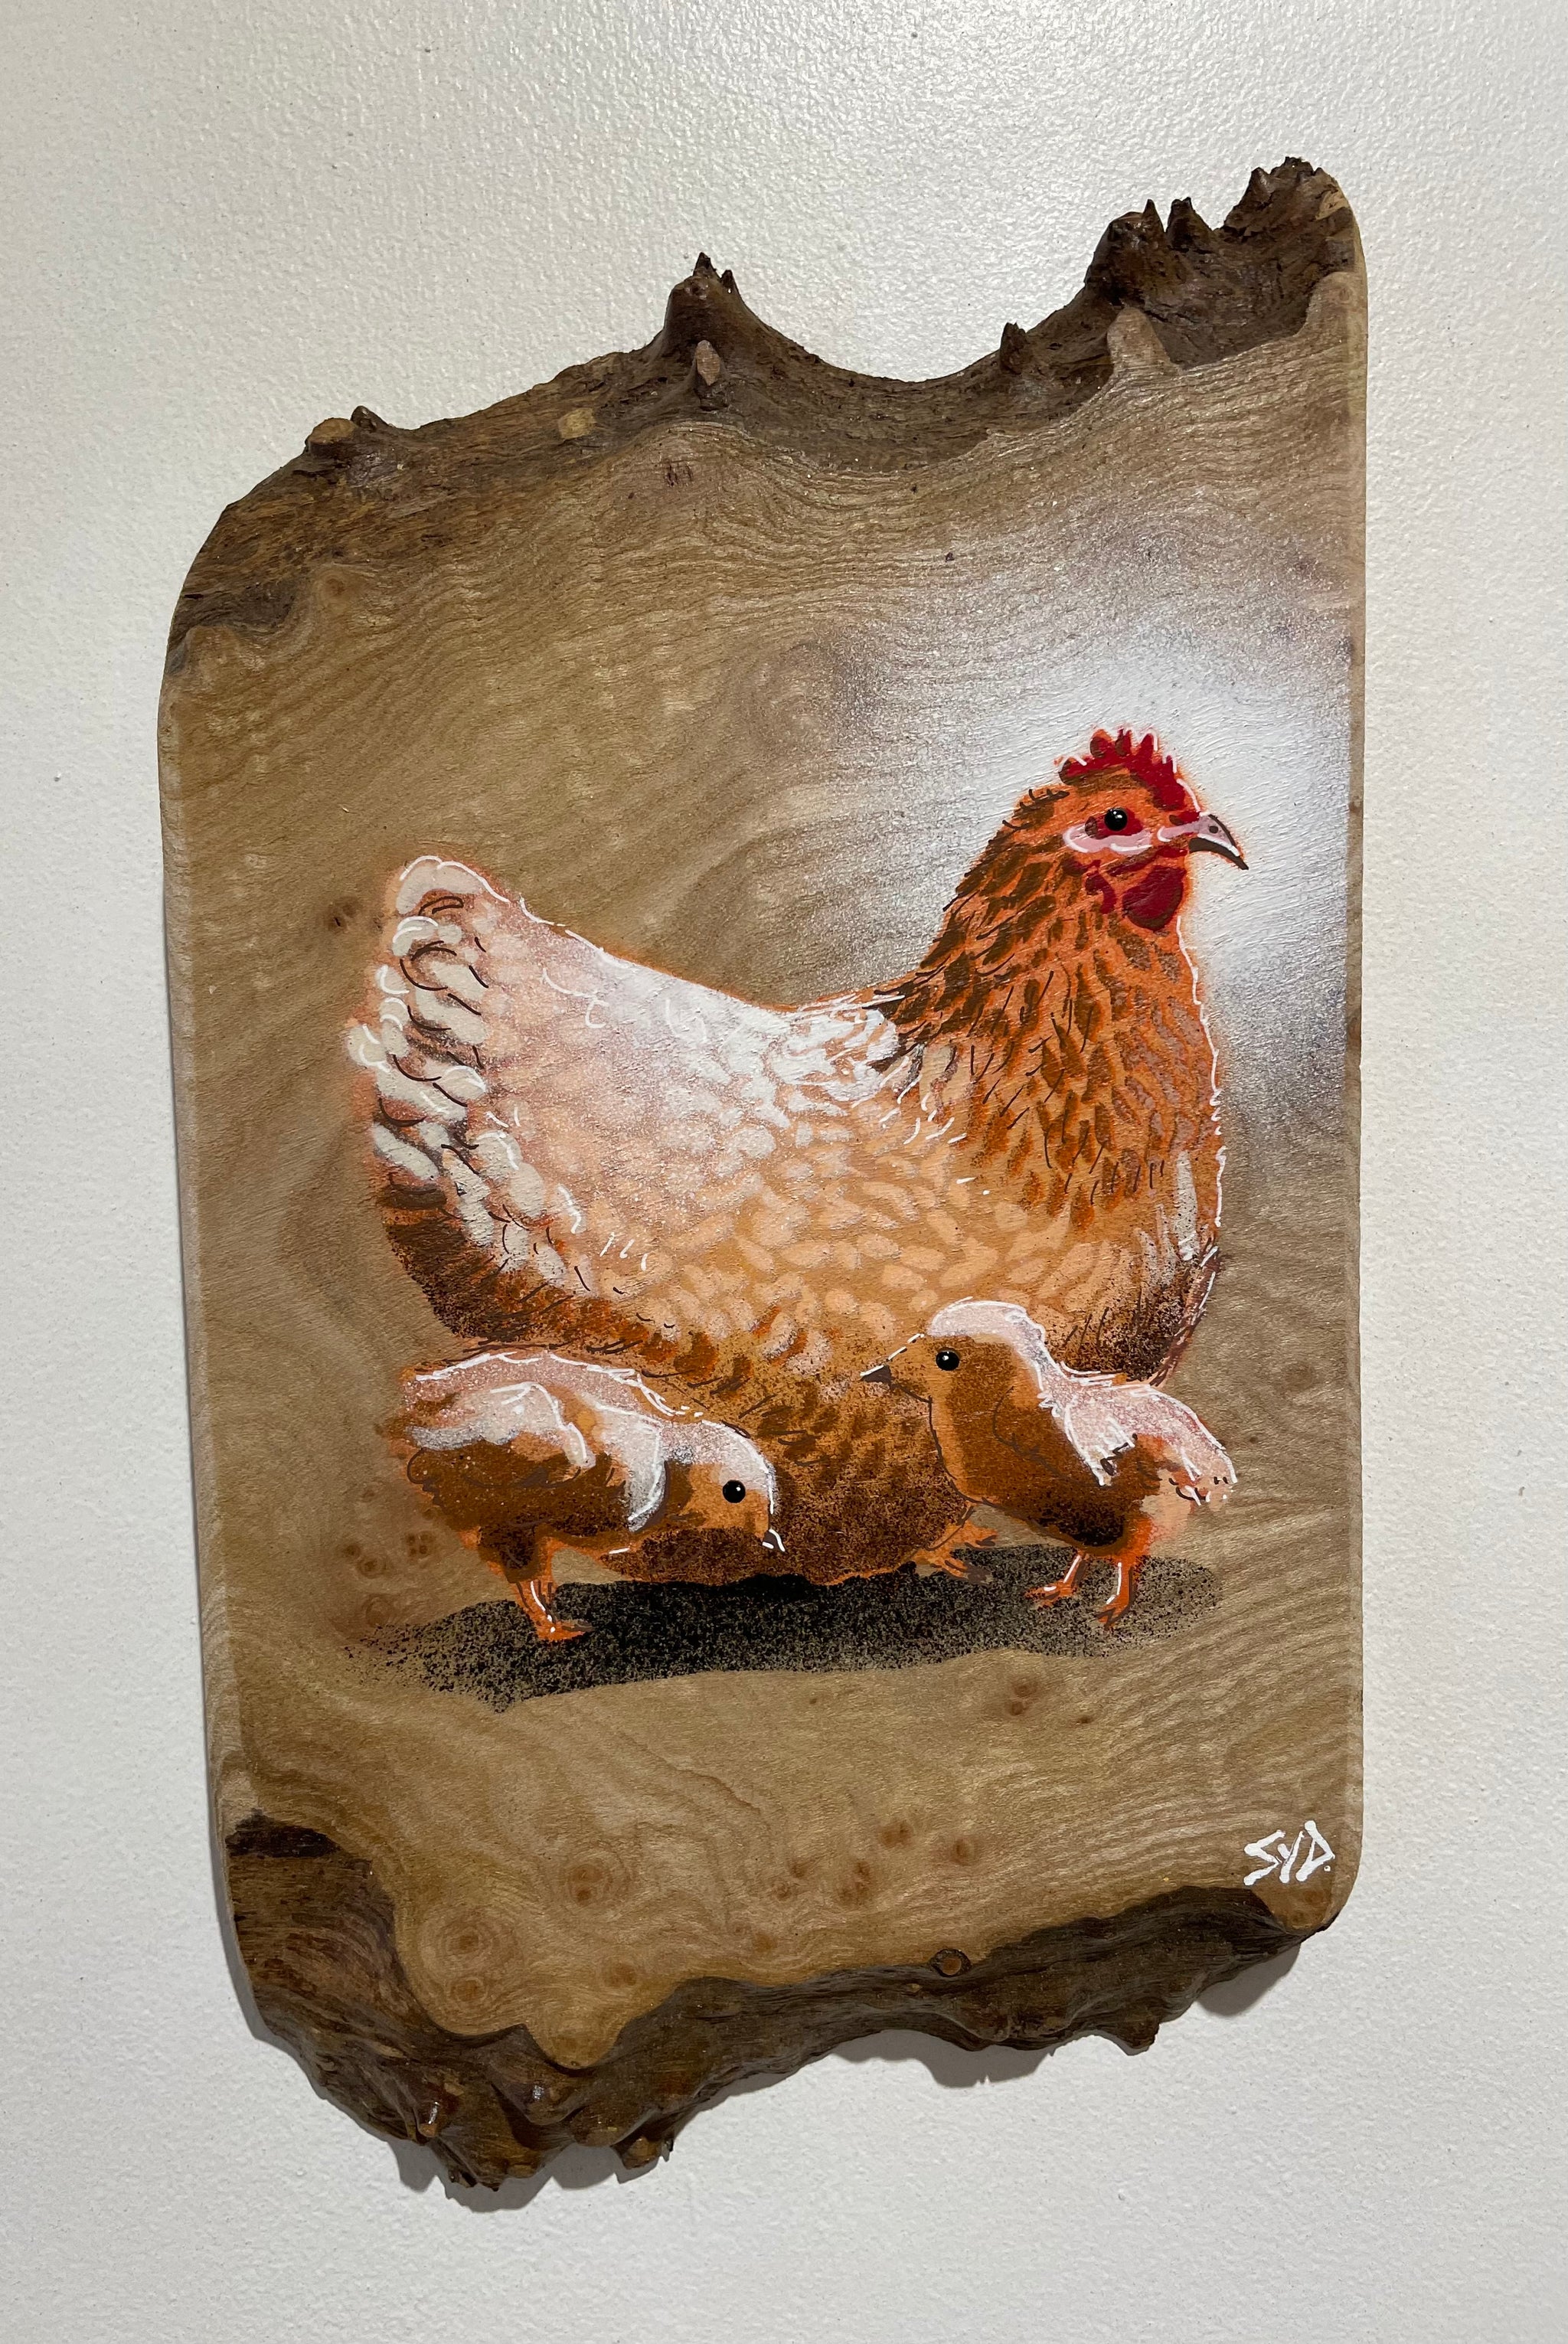 Chicken + Chicks 2023 - Number 1 in edition on rare Elm wood - 18 x 31cm